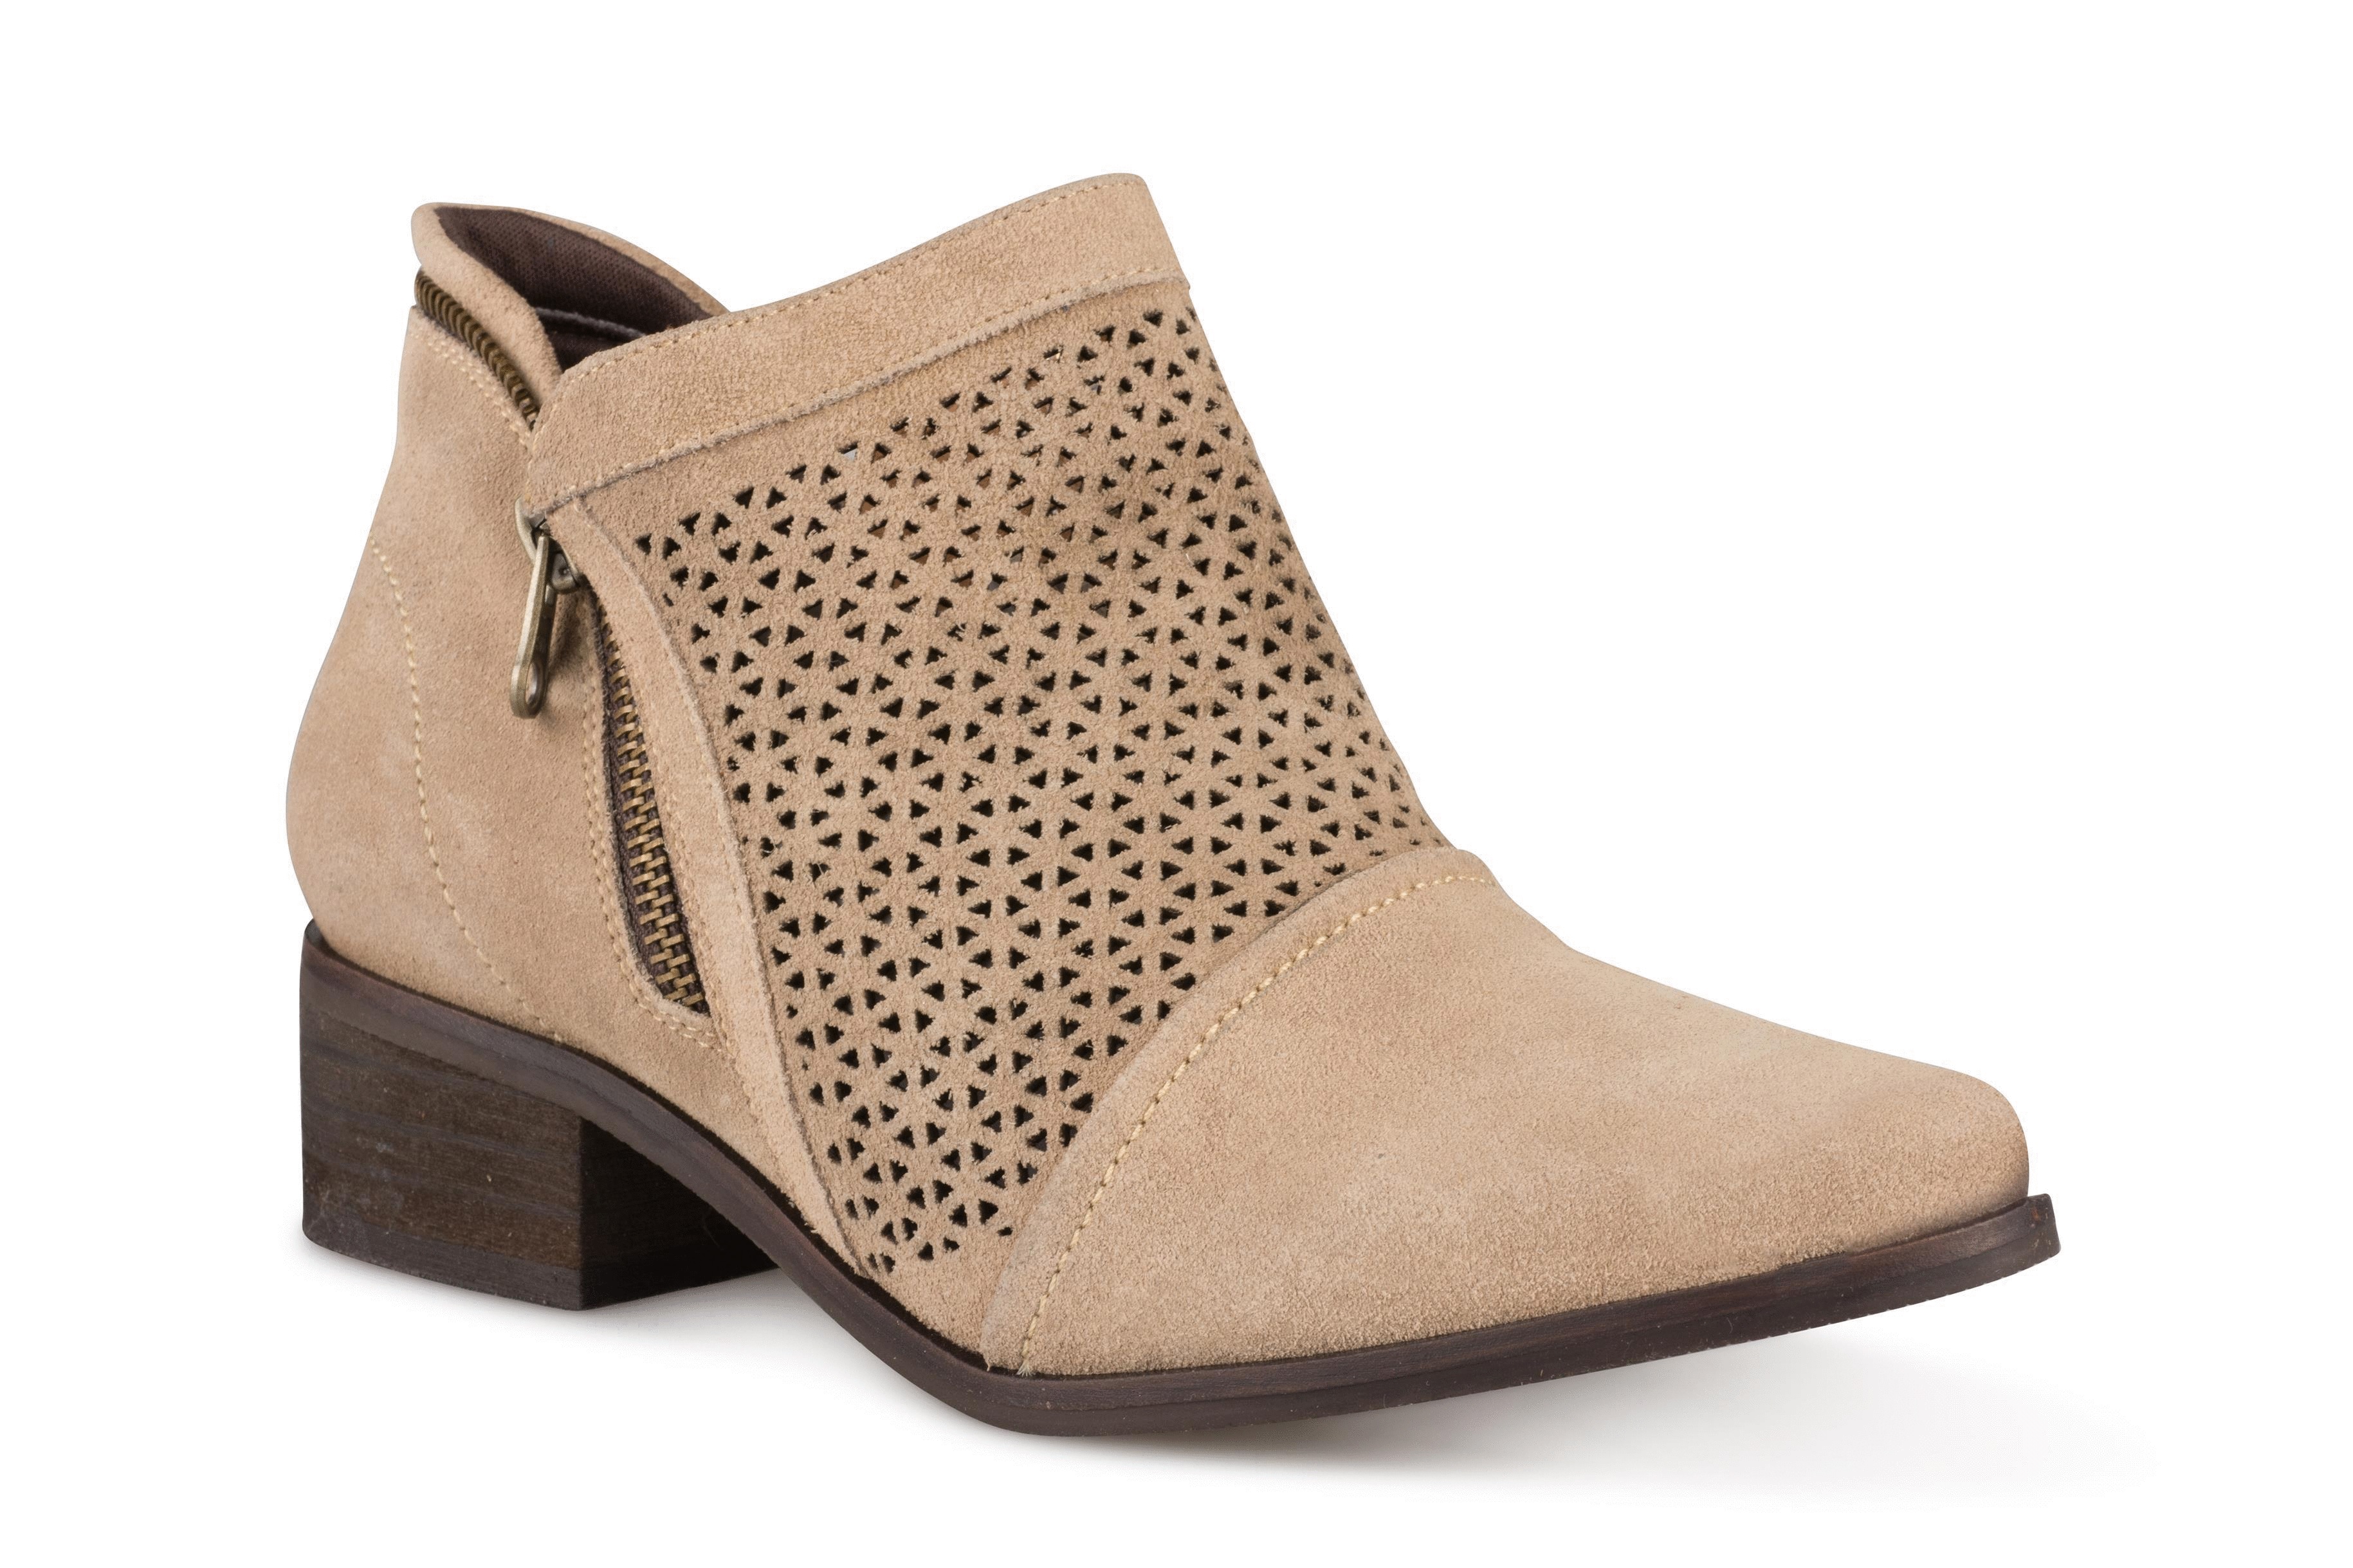 Klub Nico Zayna Bootie Taupe Nude Leather Pointed Toe Western Ankle Boots